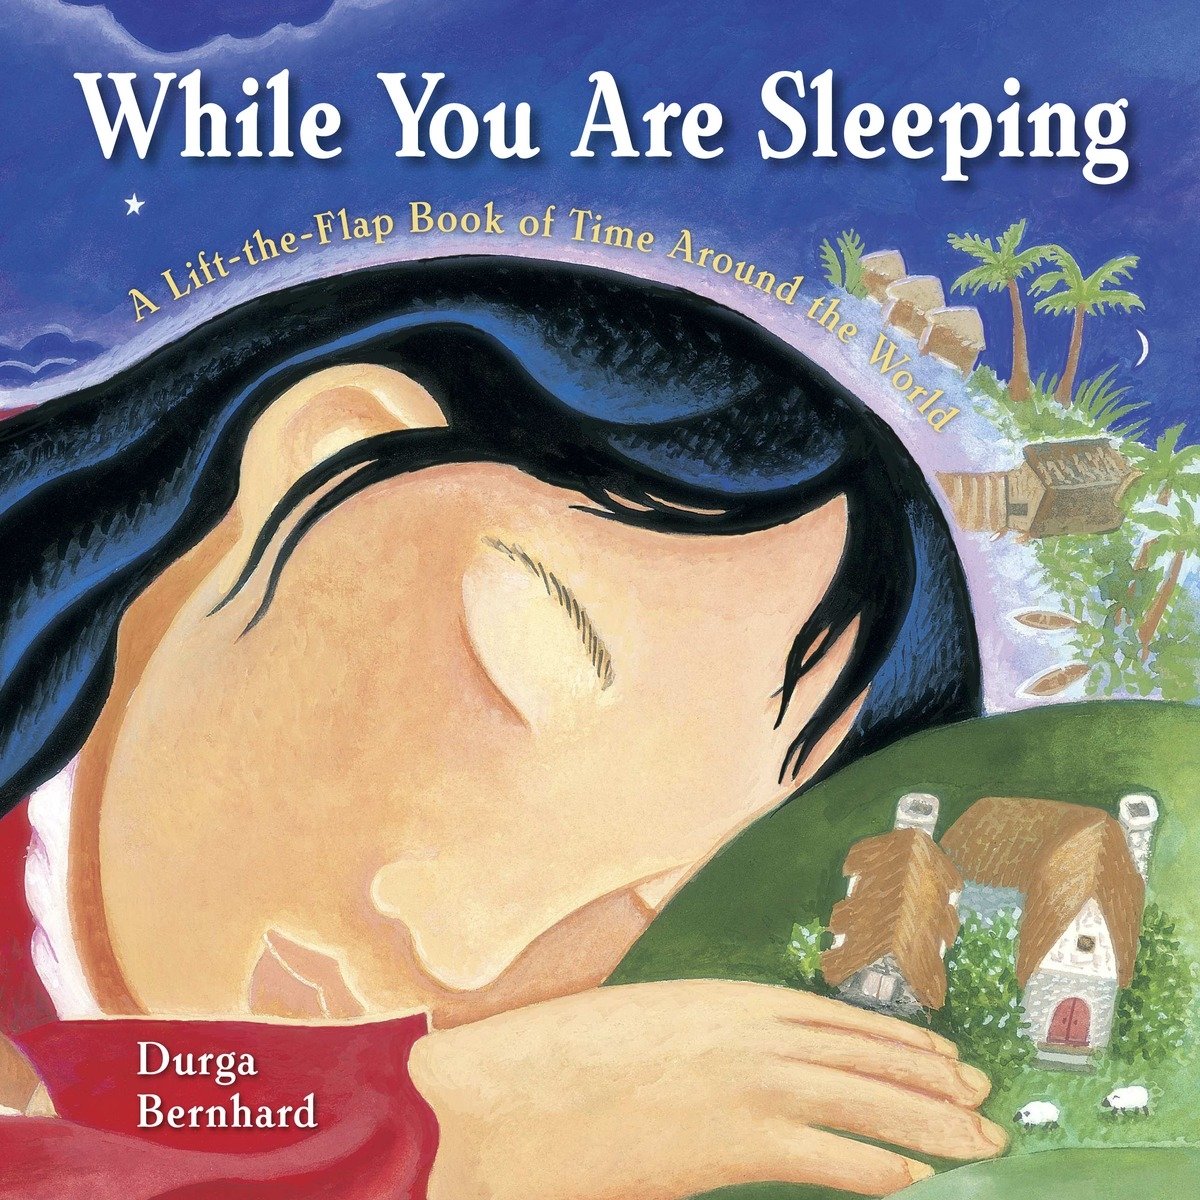 While You Are Sleeping: A Lift-the-Flap Book of Time Around the World